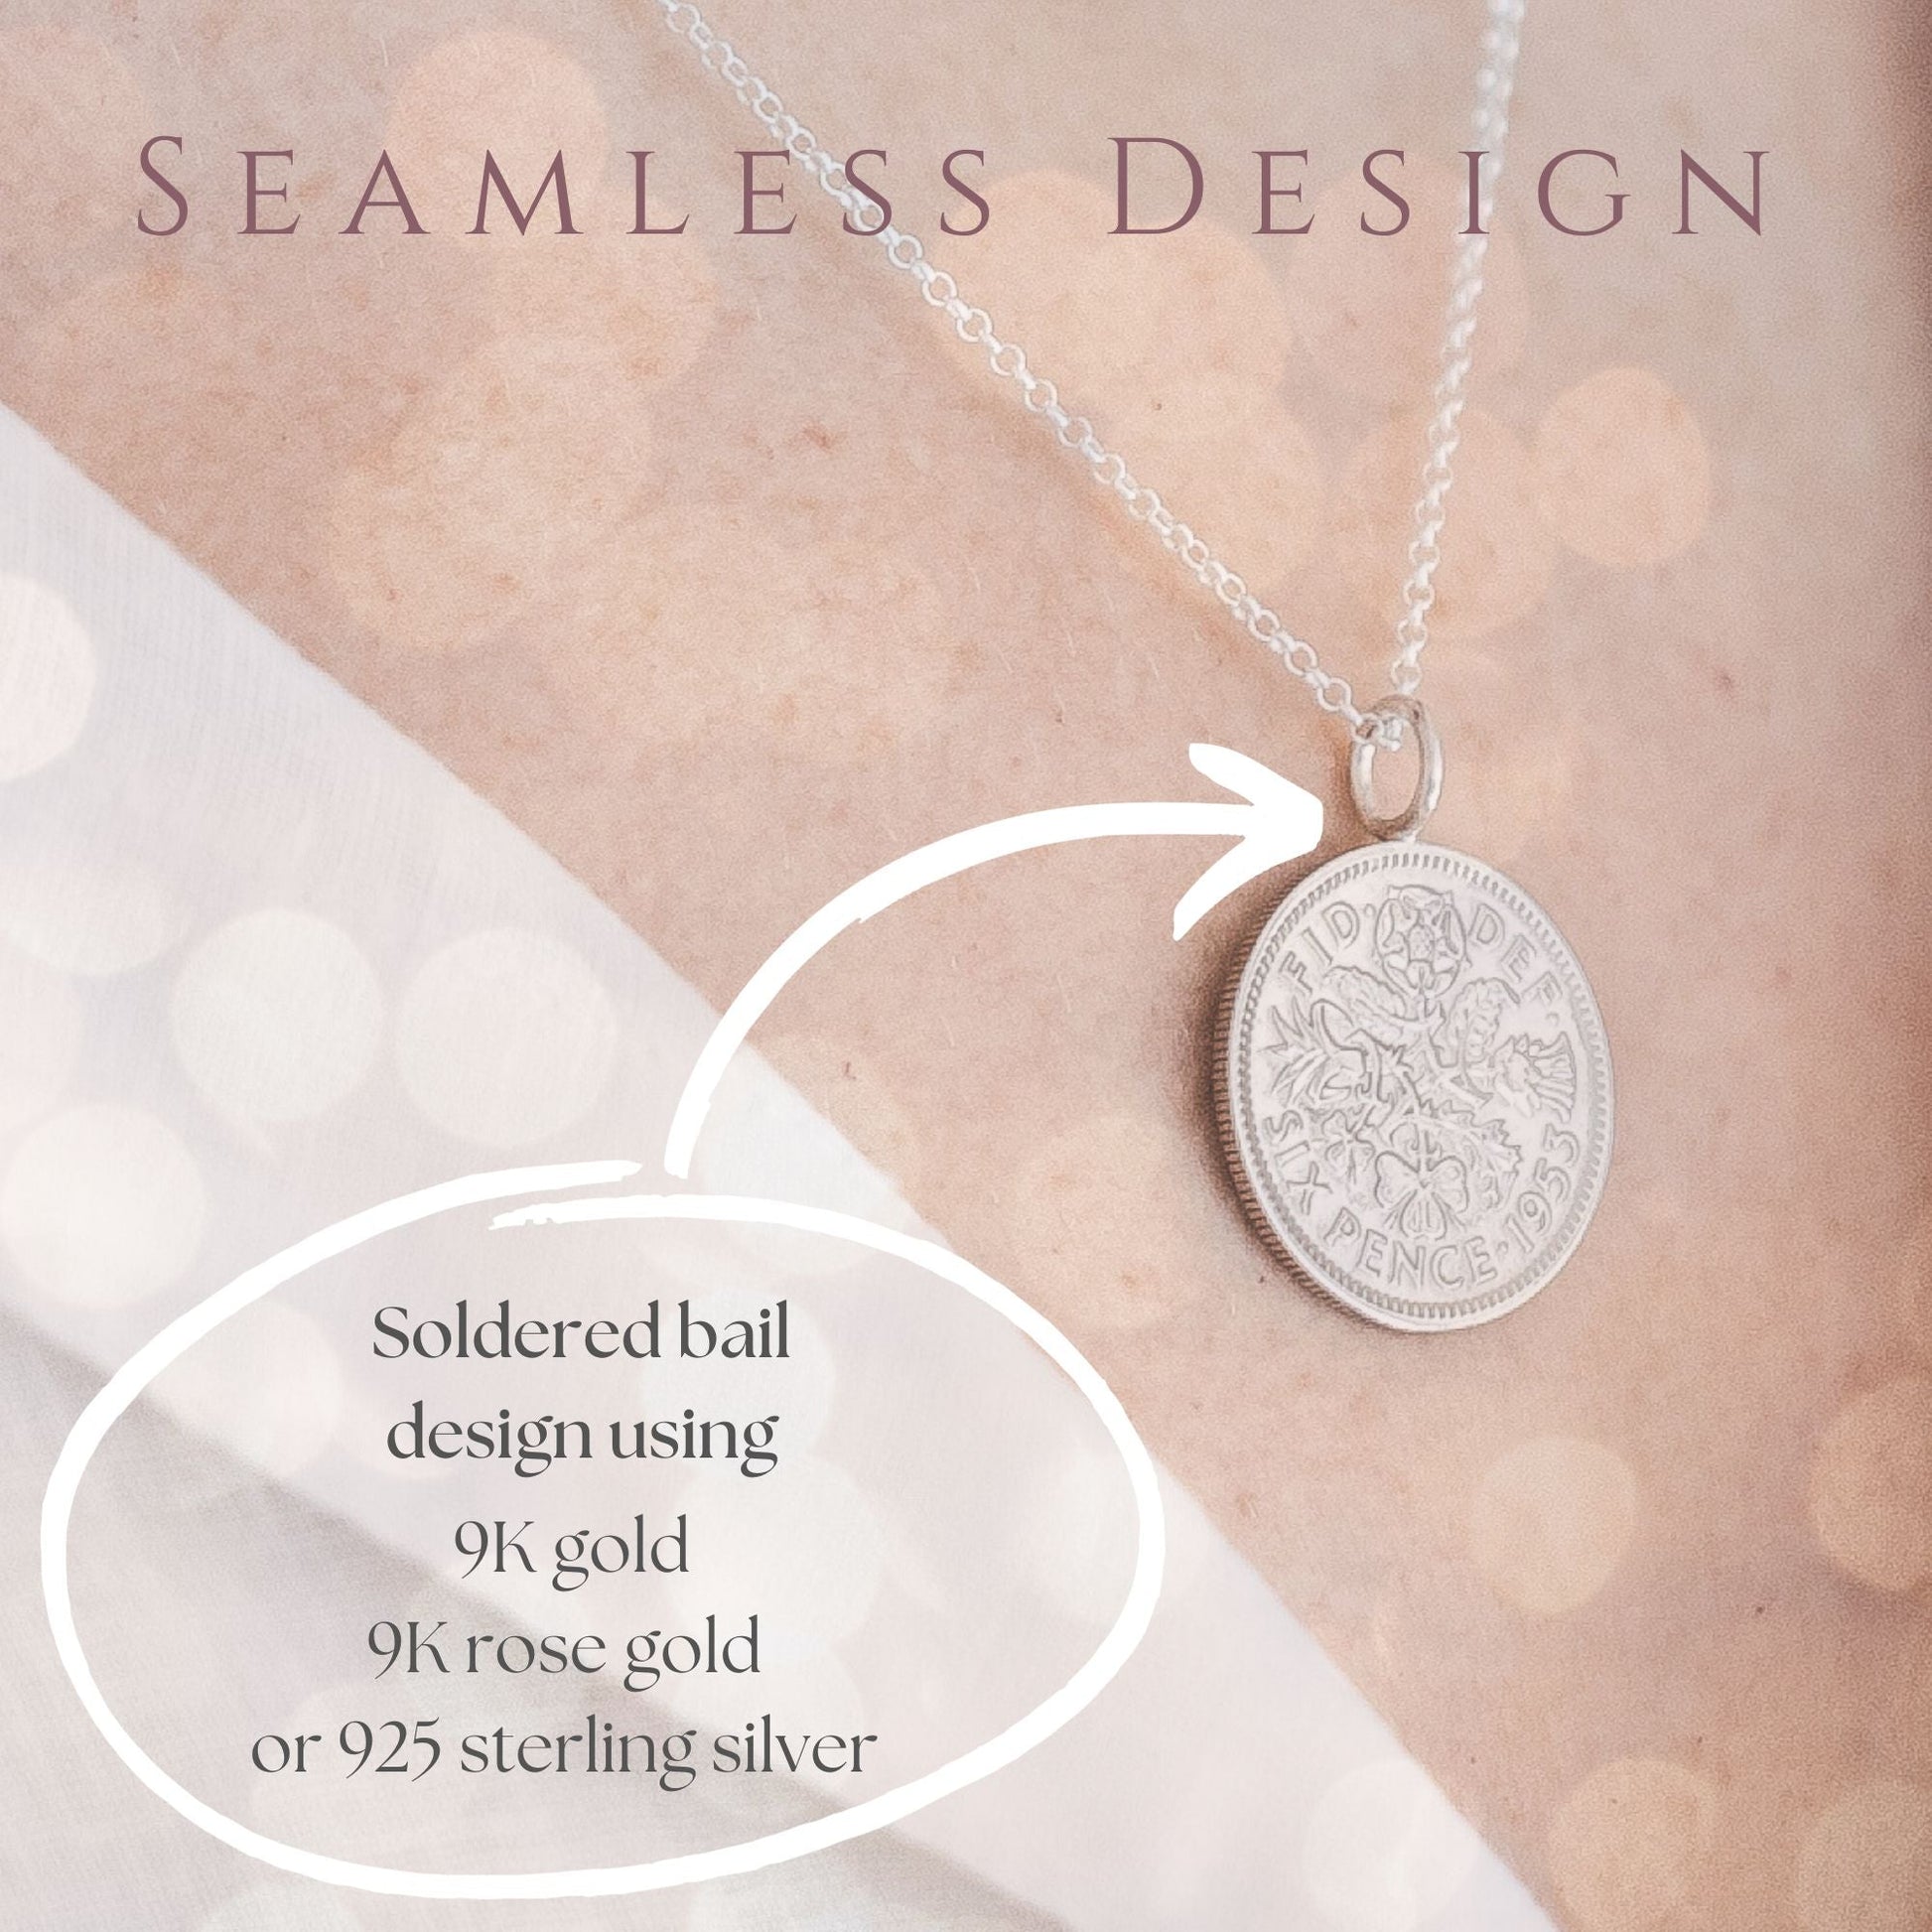 Soldered bails with gold or silver to create a premium finish coin necklace piece